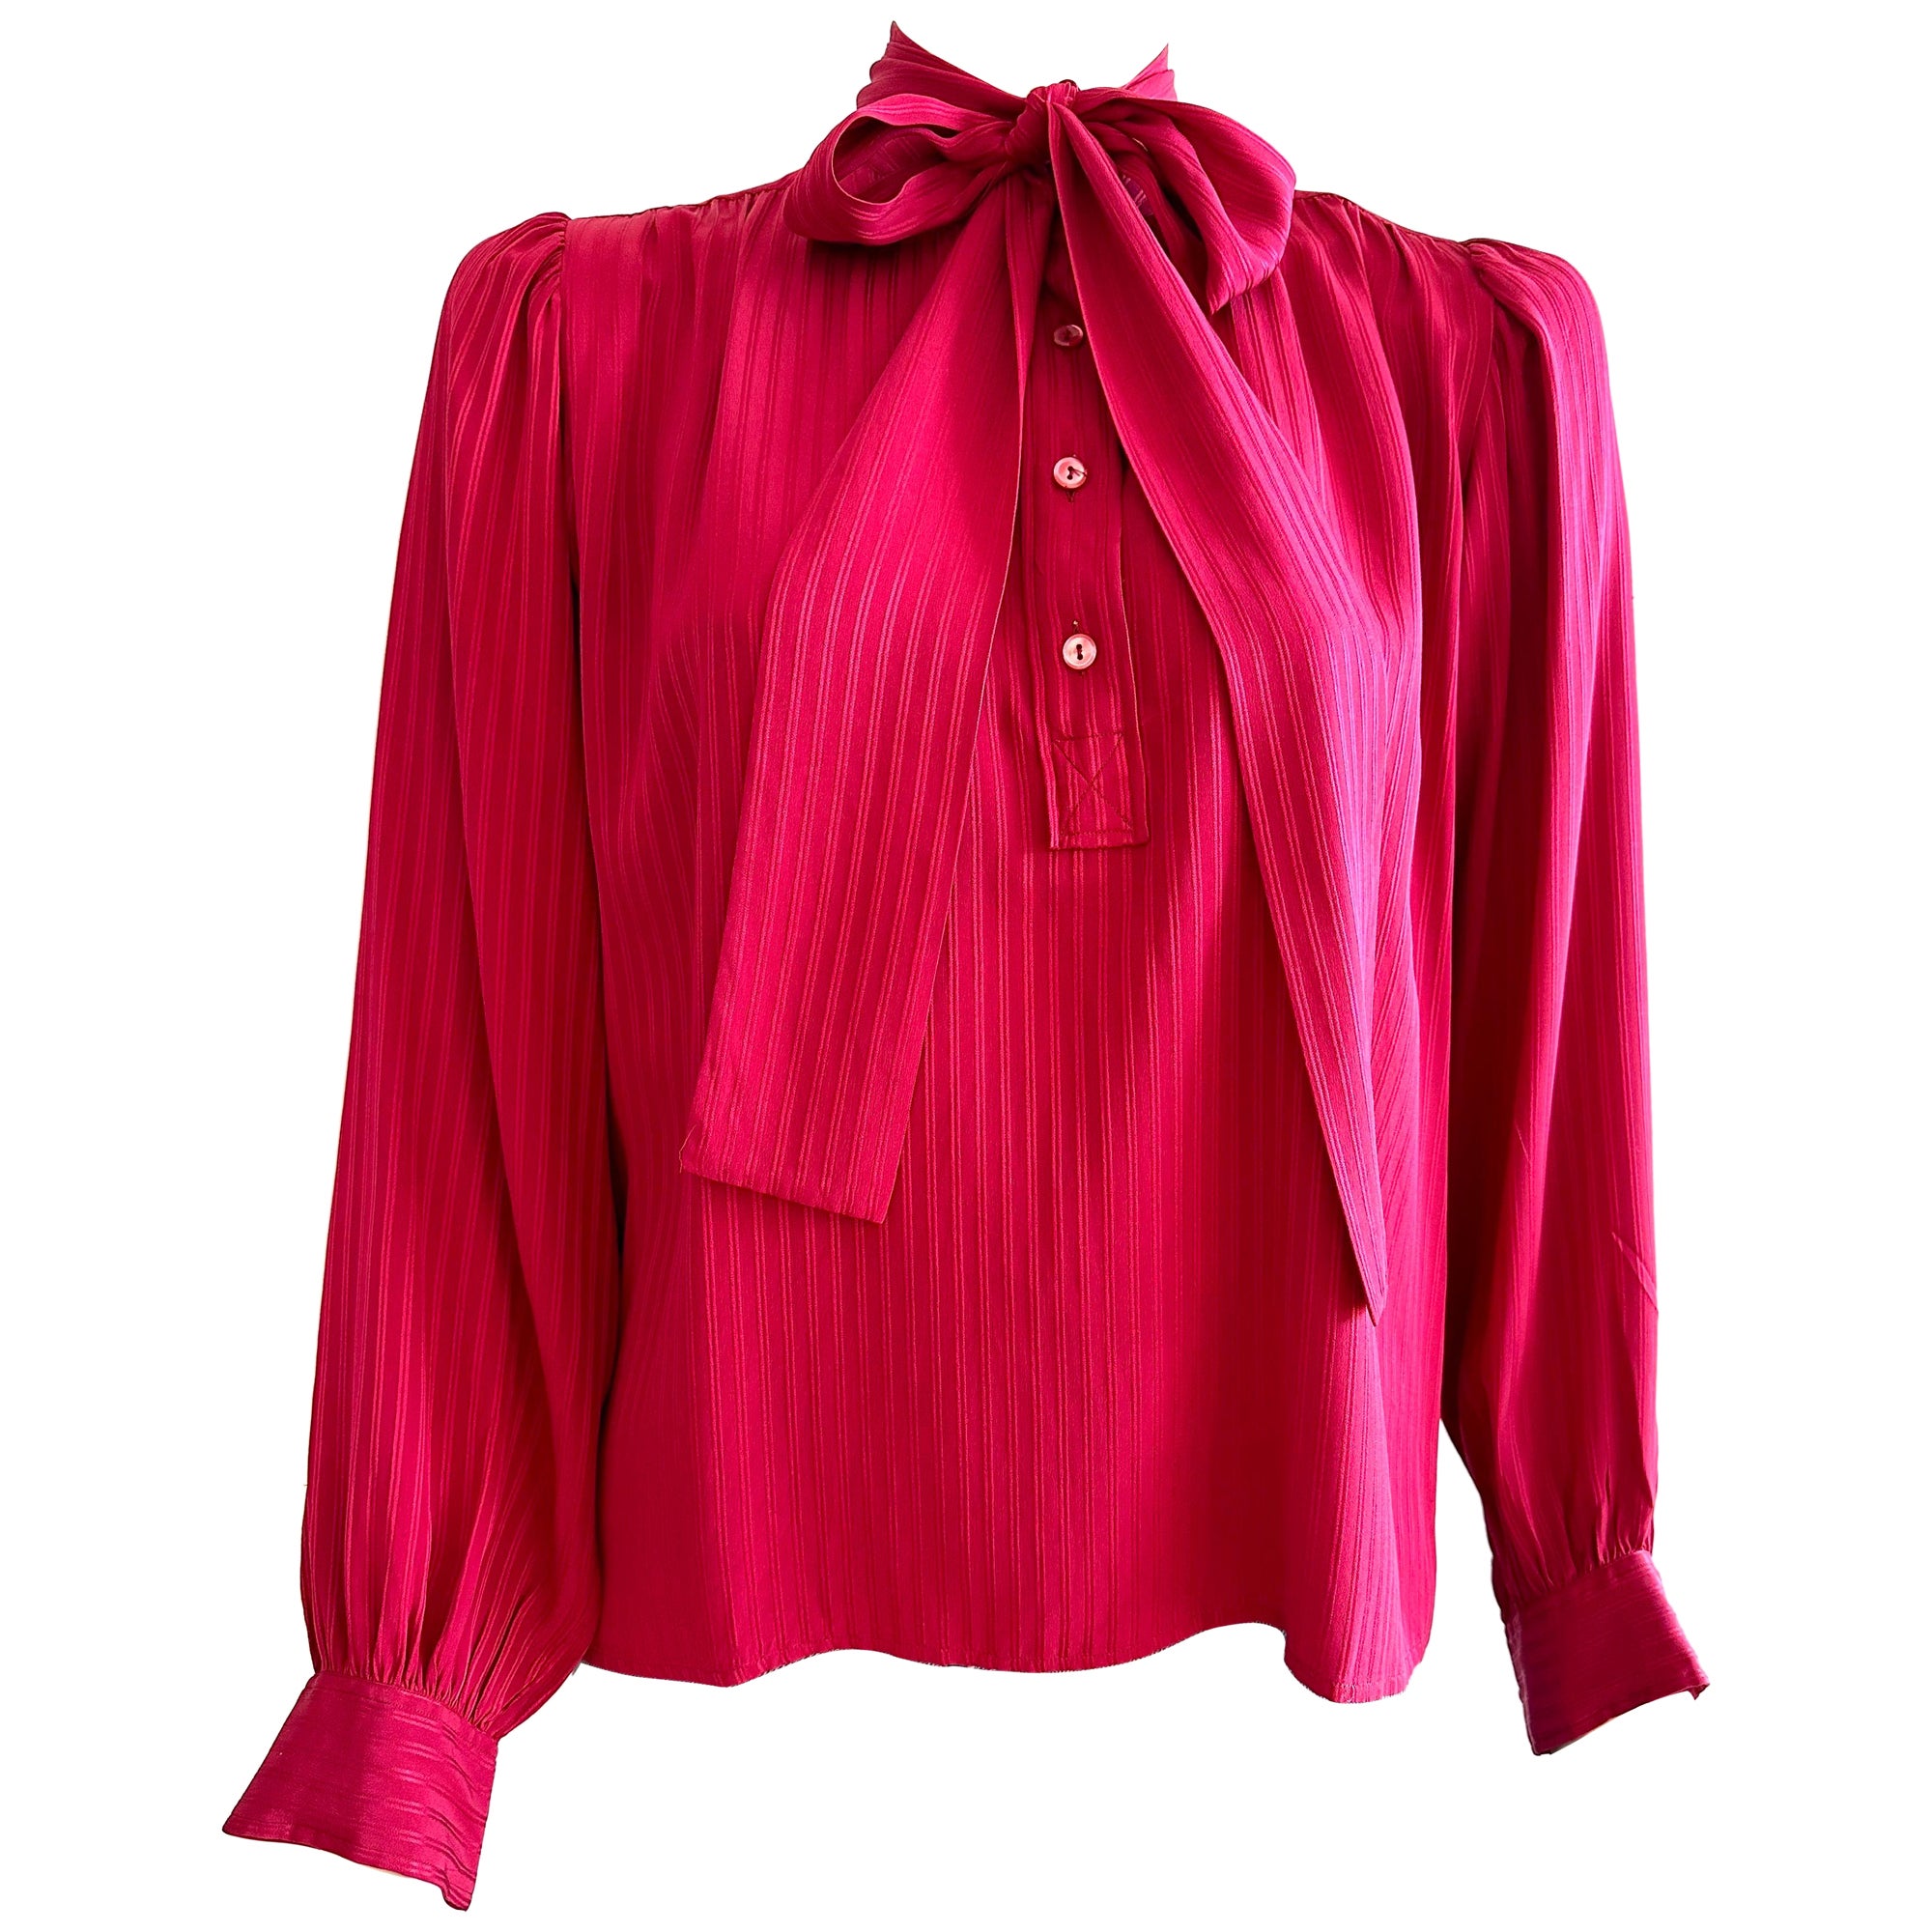 YSL Yves saint Laurent lavalliere blouse in red silk 